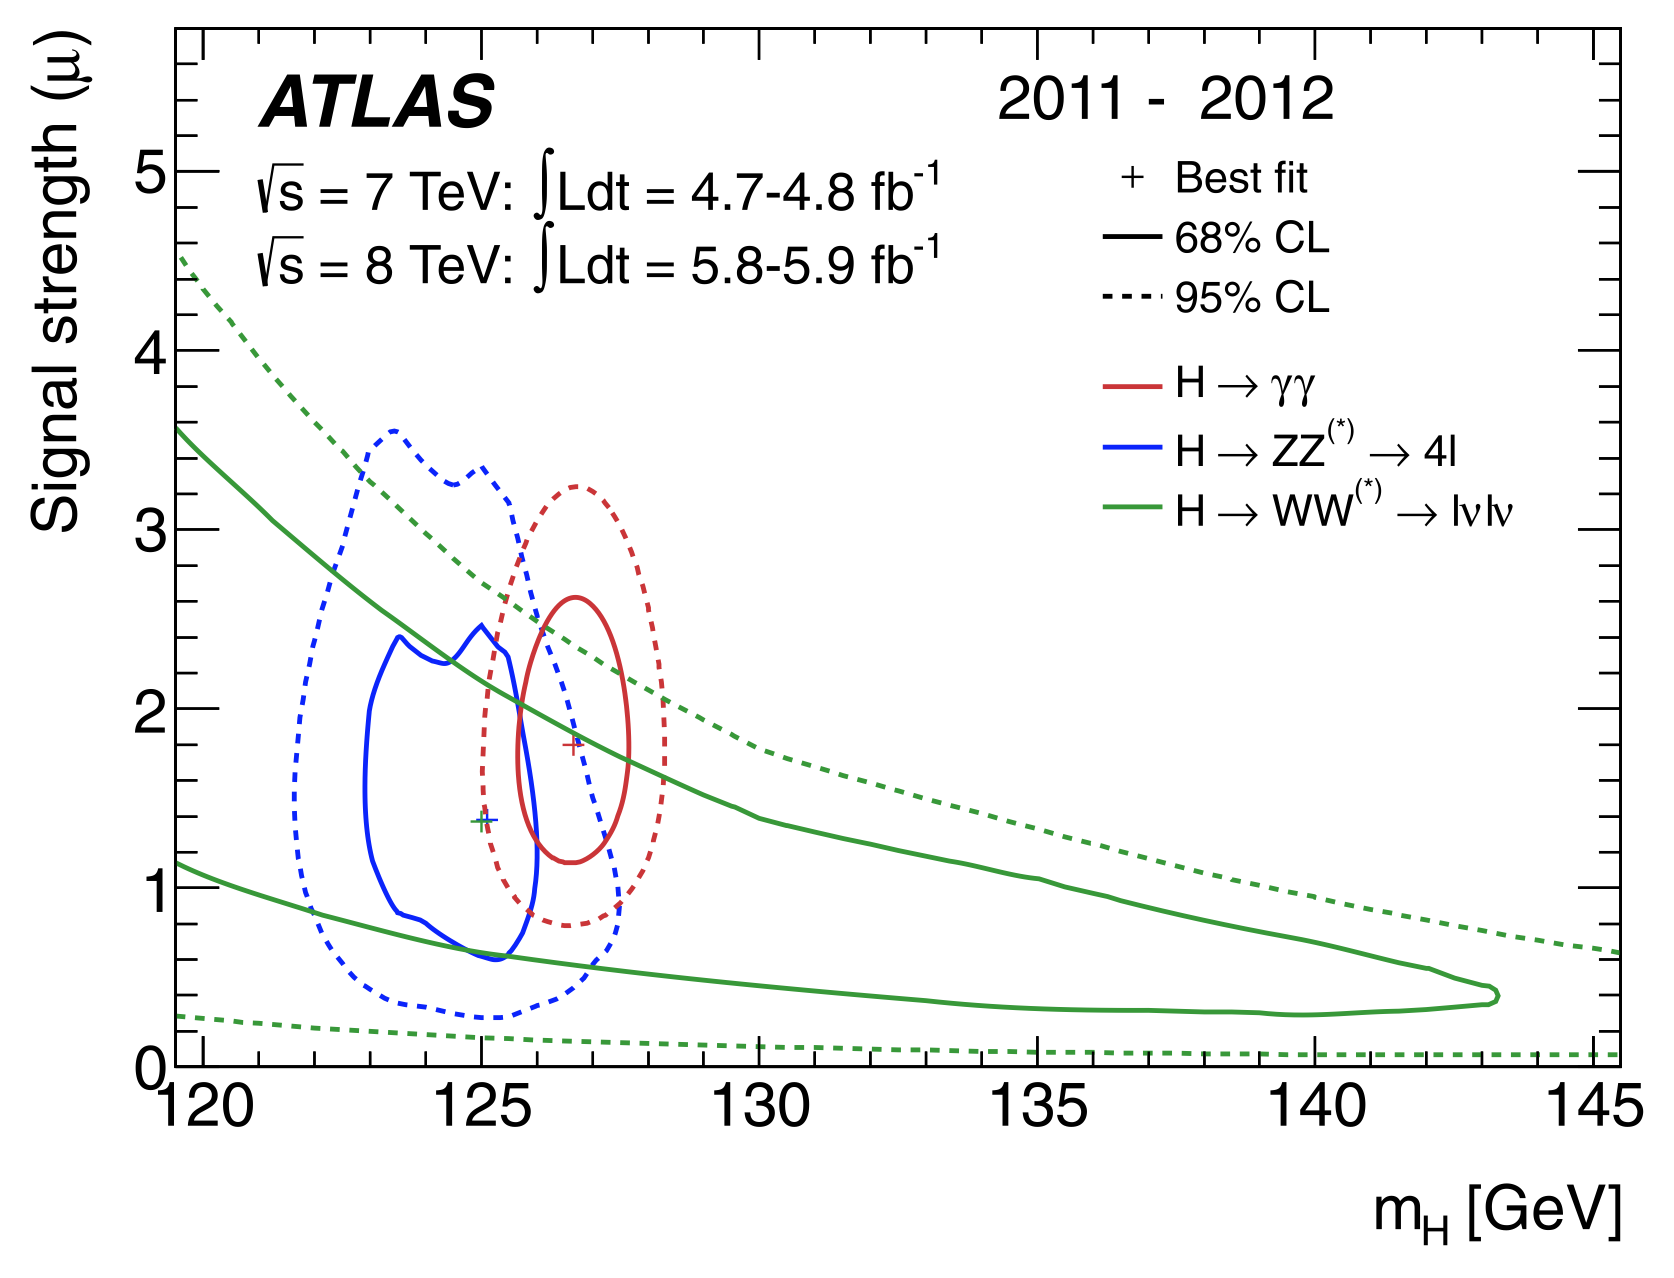 famous Higgs overview plot